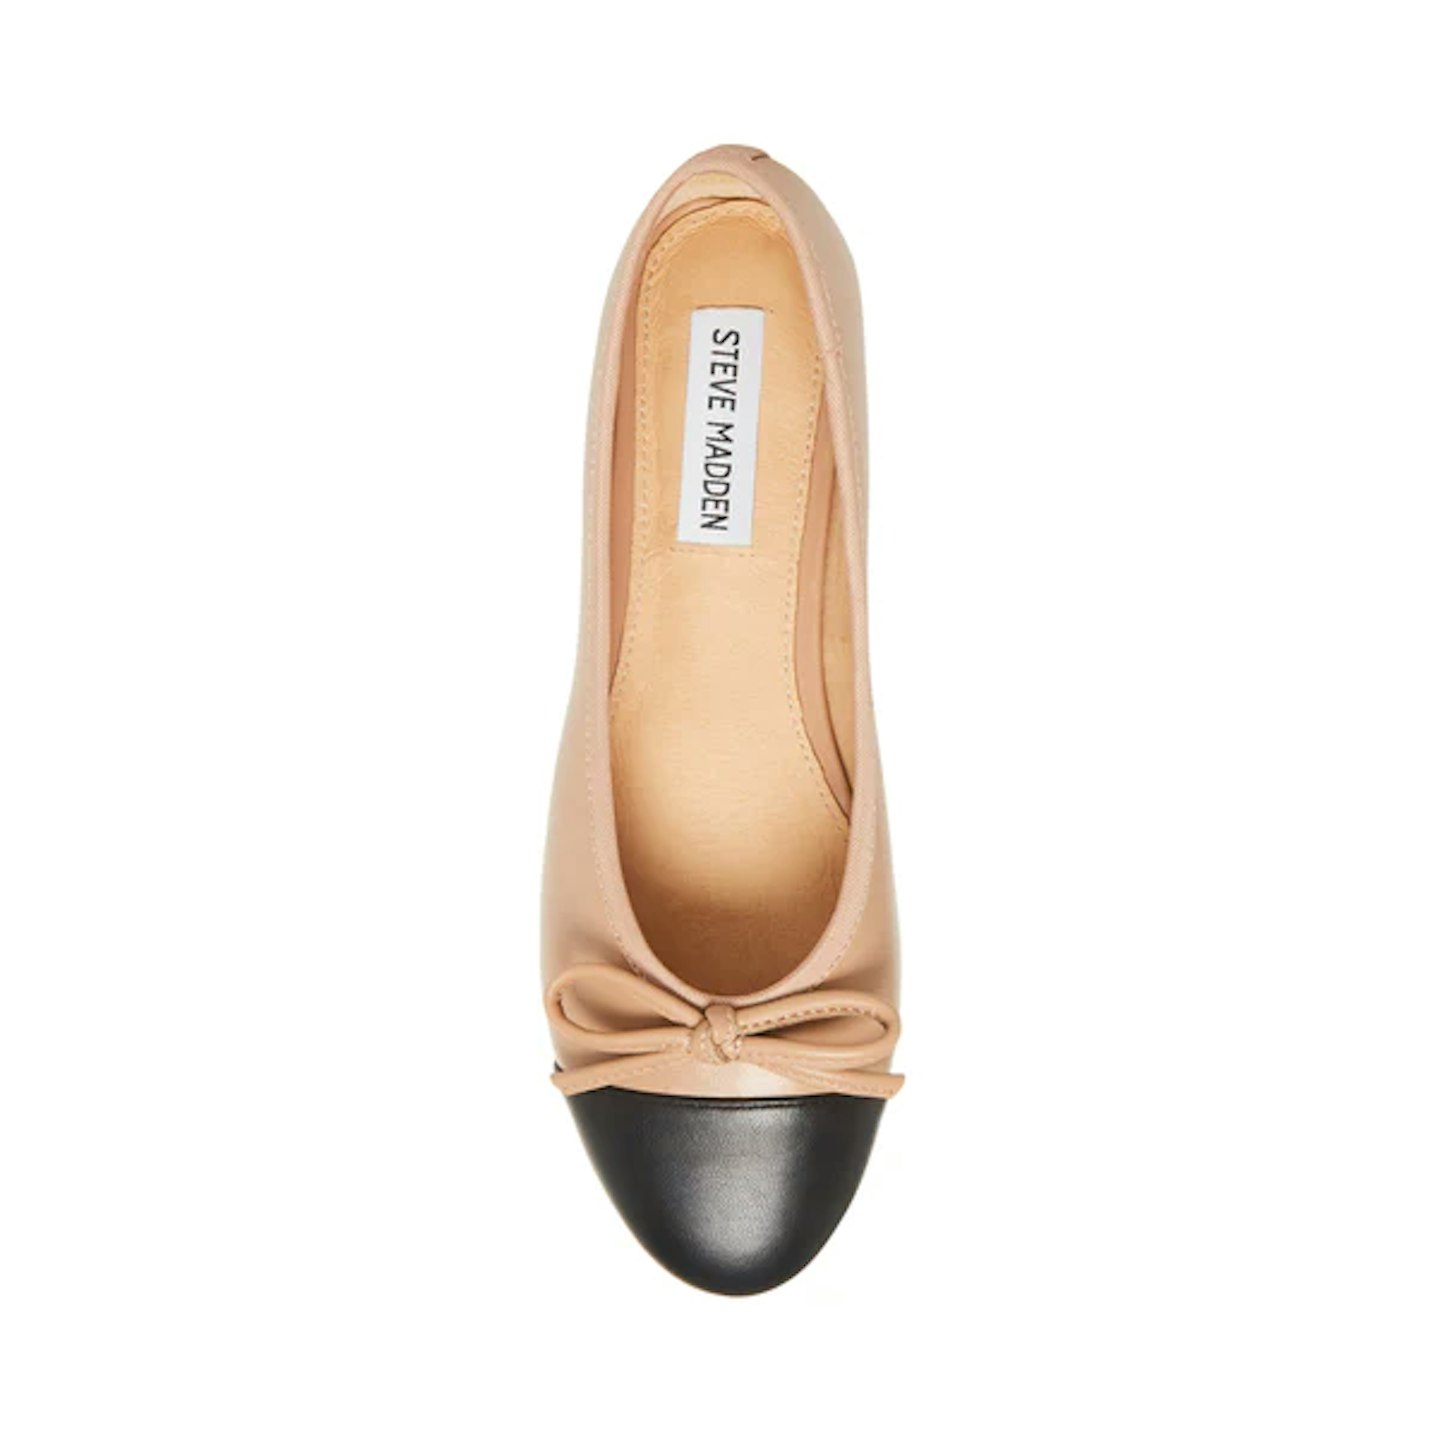 Pragmatic PriceBallet flats are in fashion again and here are some